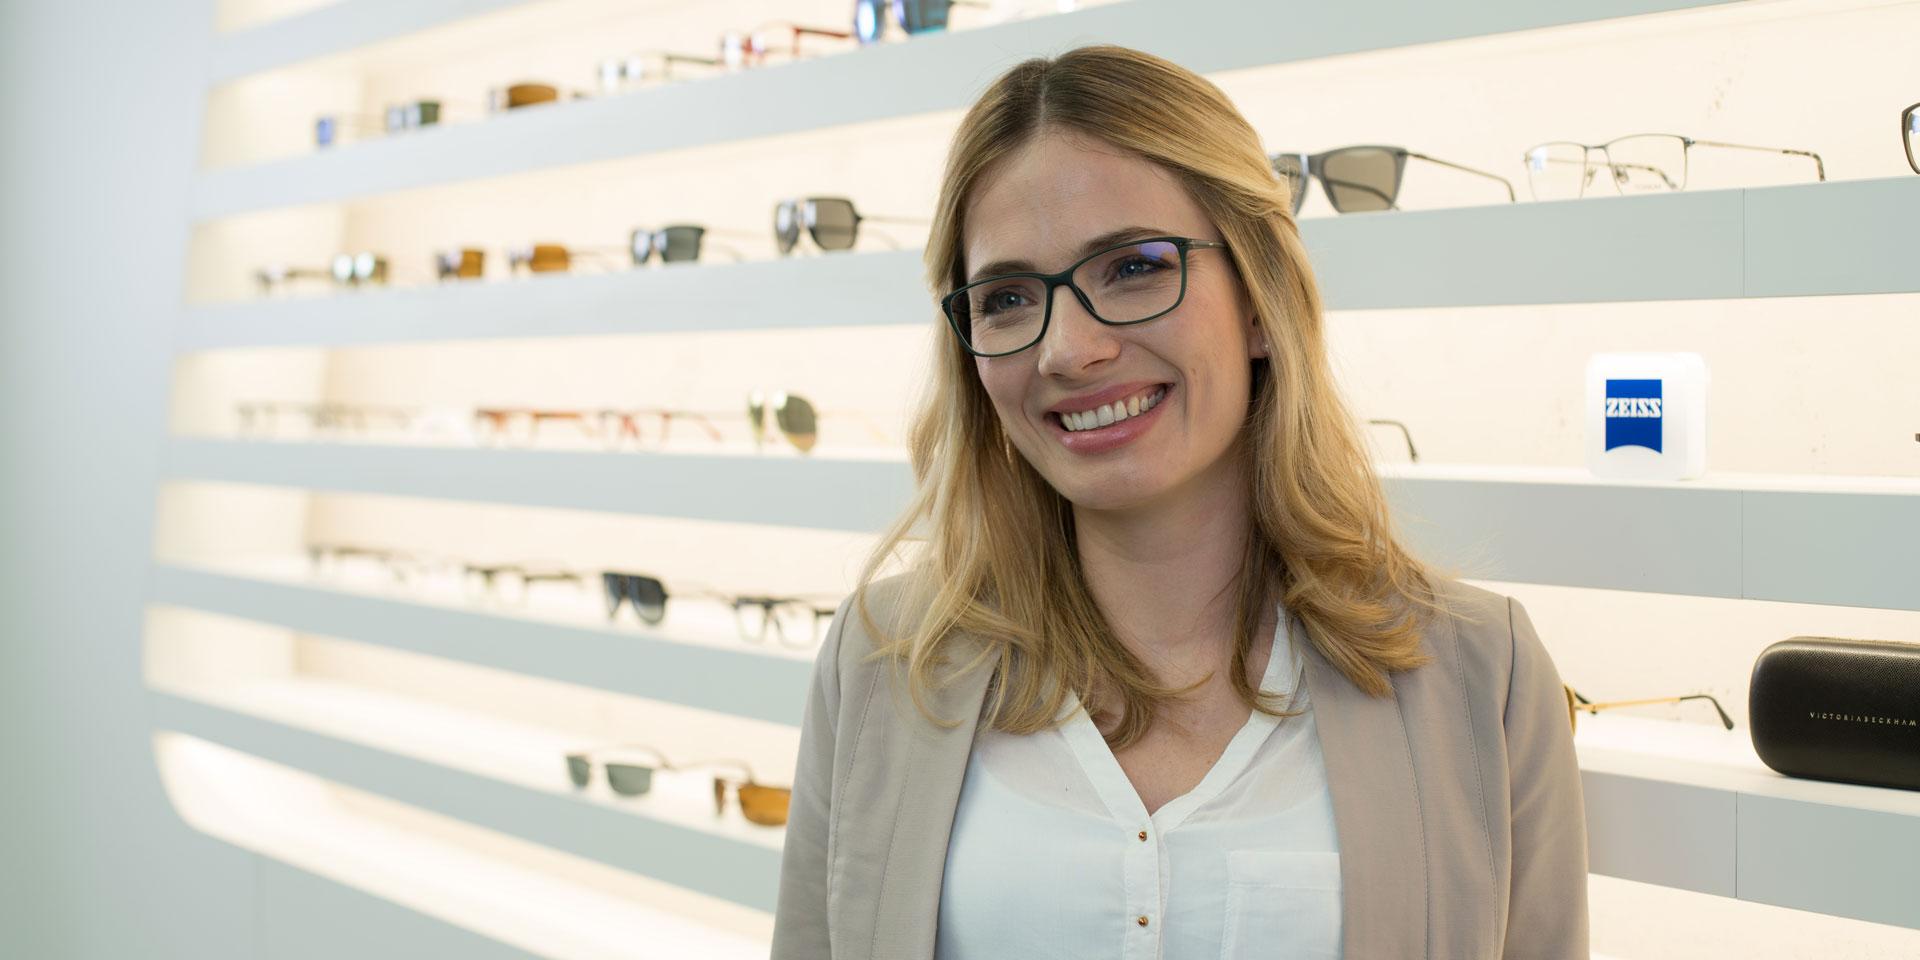 Tips for buying eyeglasses: How to find the correct glasses for you.